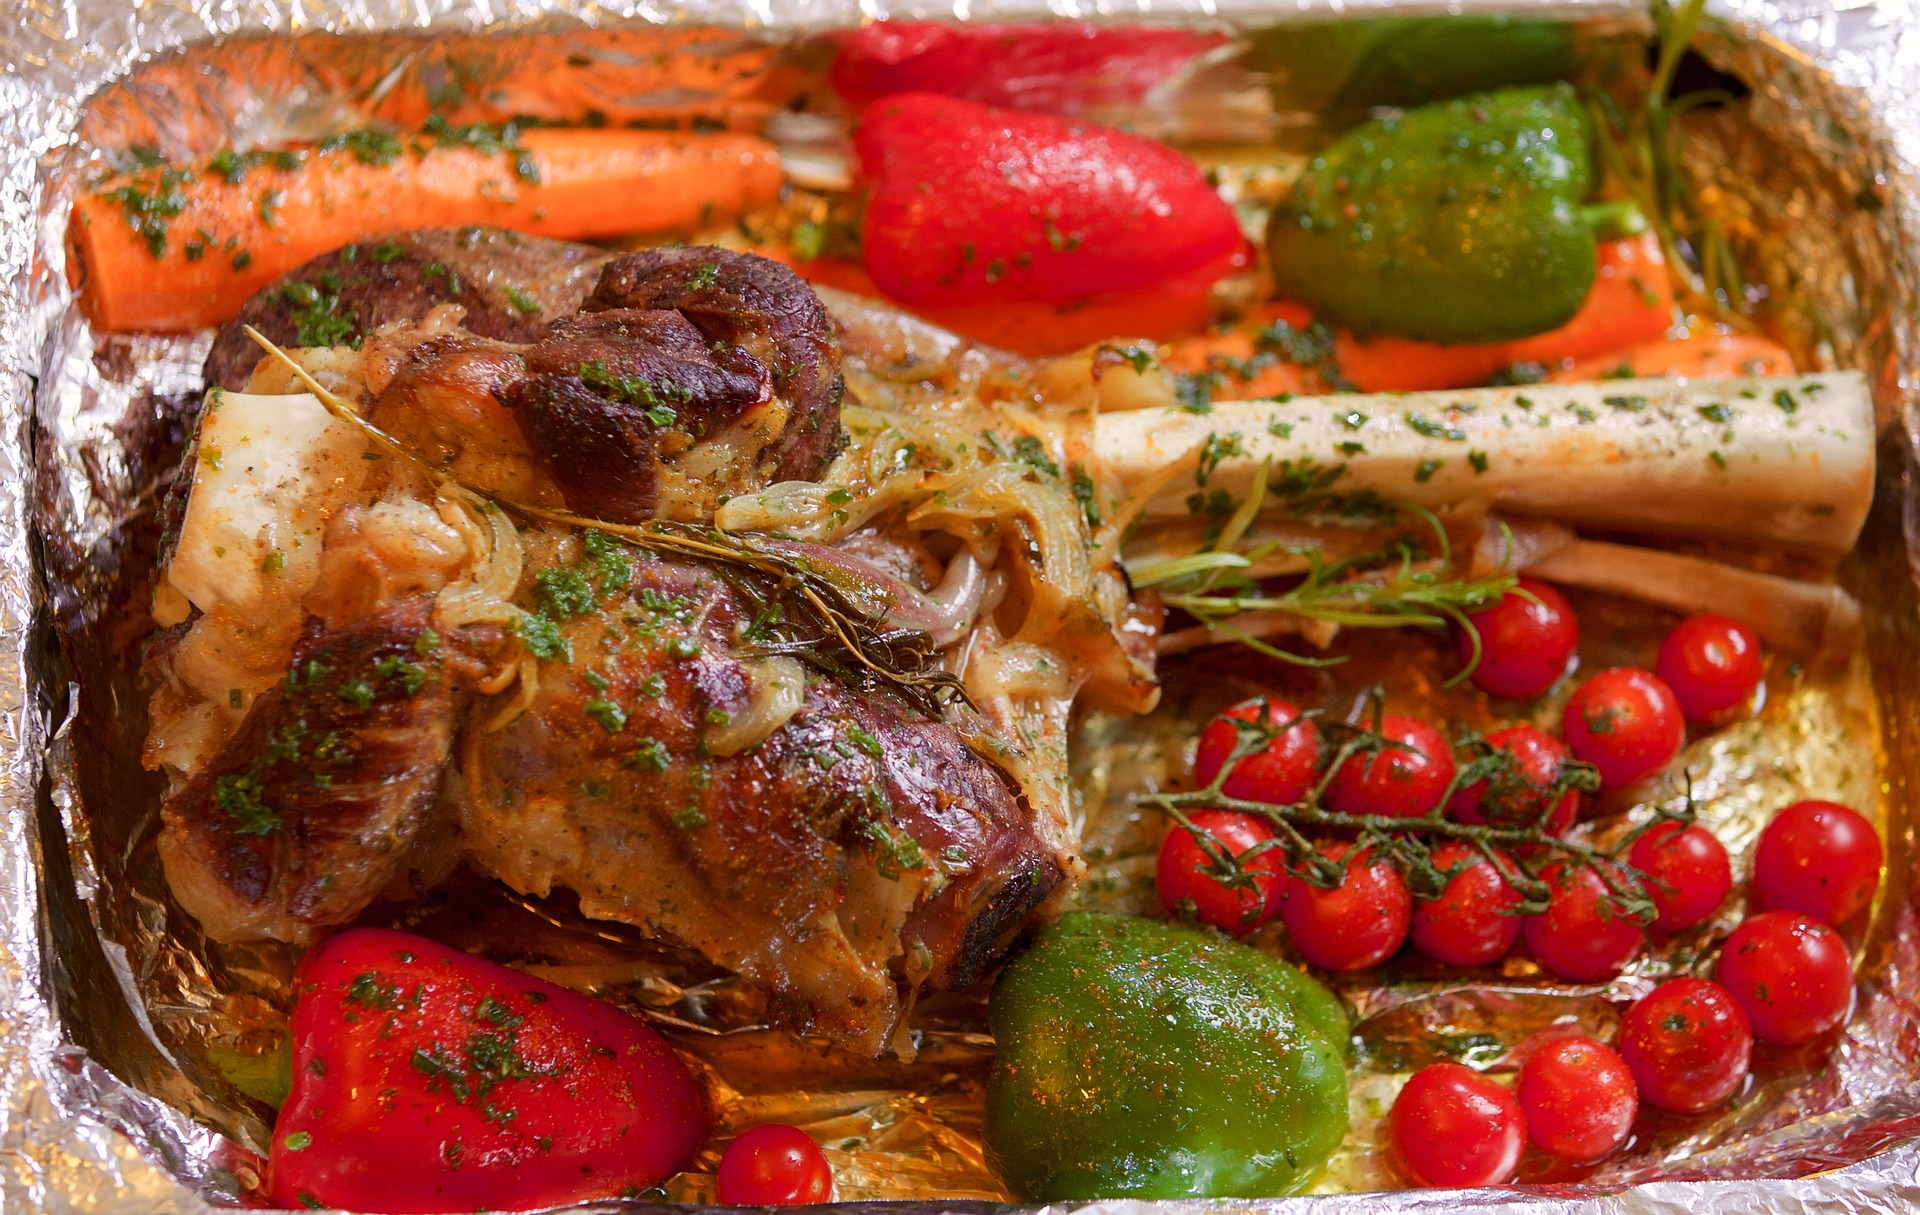 Garlic-Rubbed Leg of Lamb with Roasted Vegetables